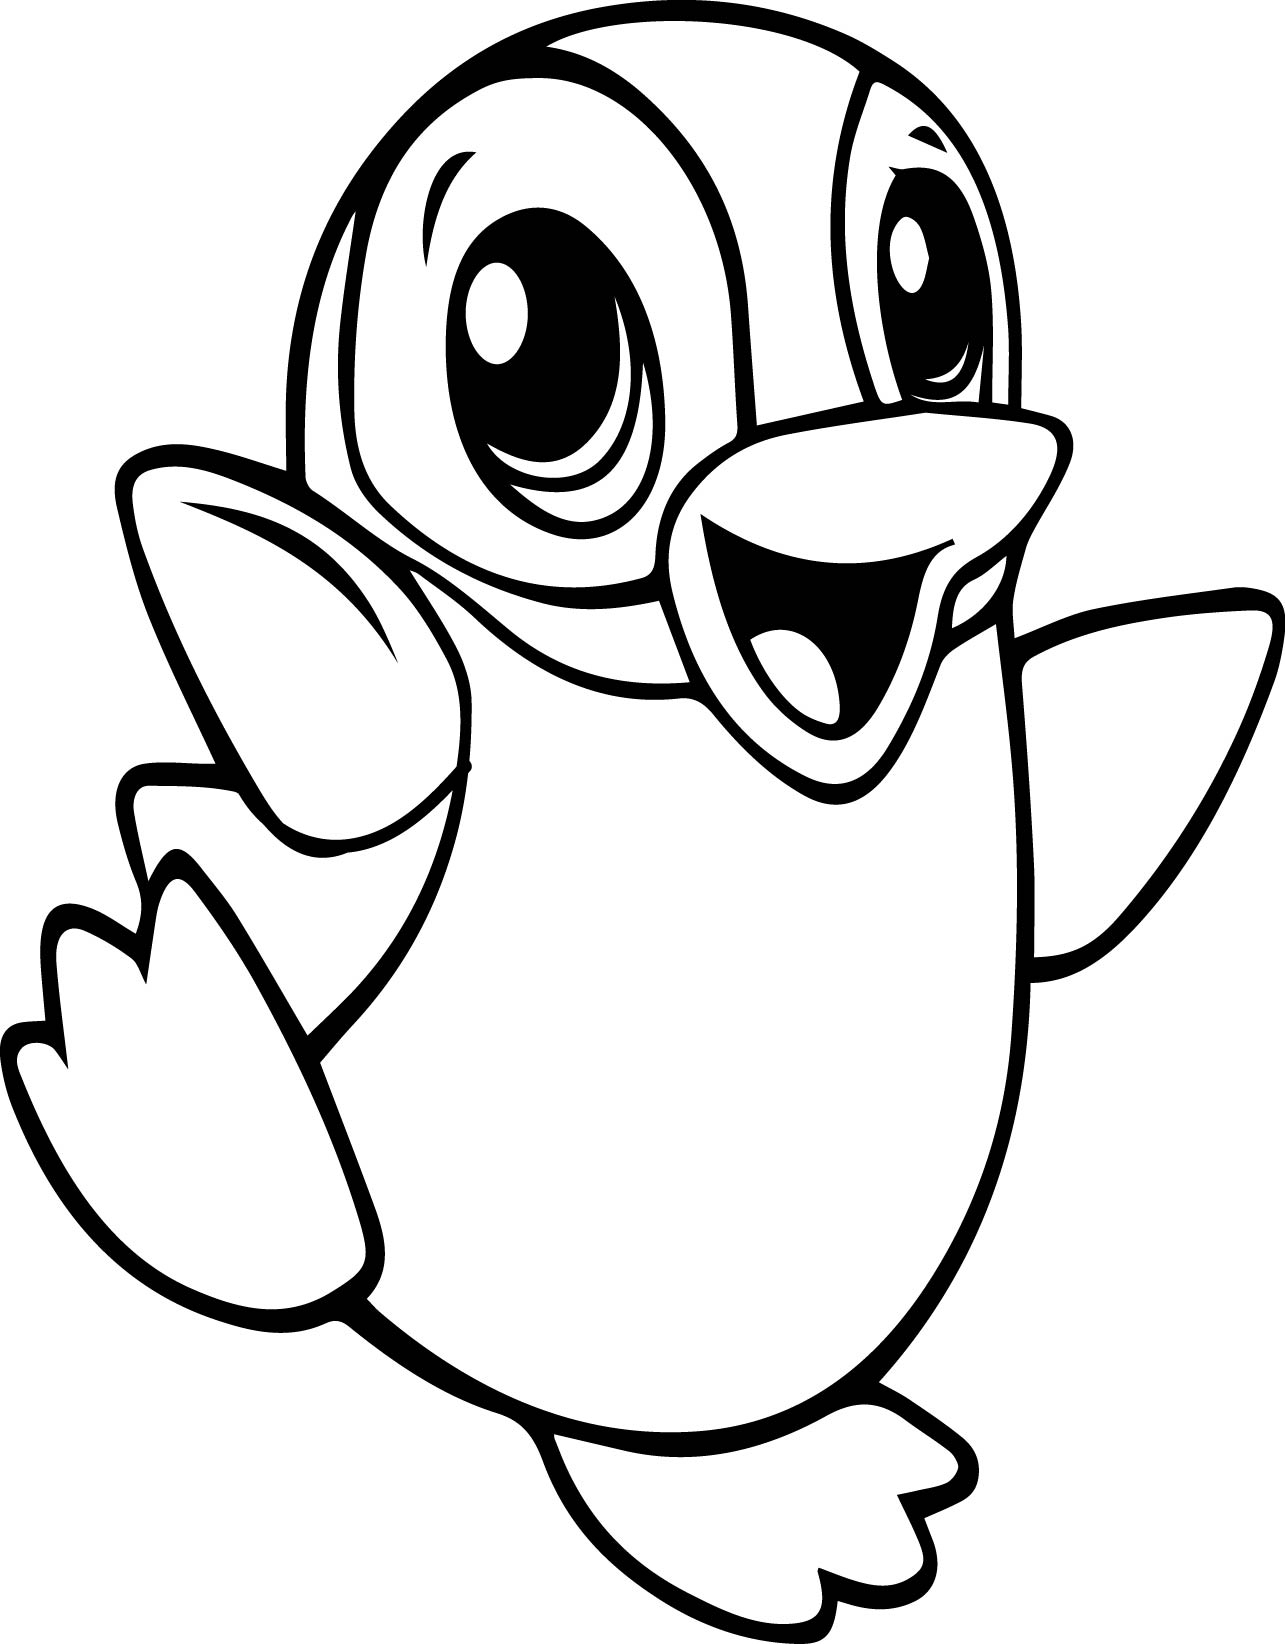 Cute Animal Coloring Pages at GetColorings.com   Free printable ...